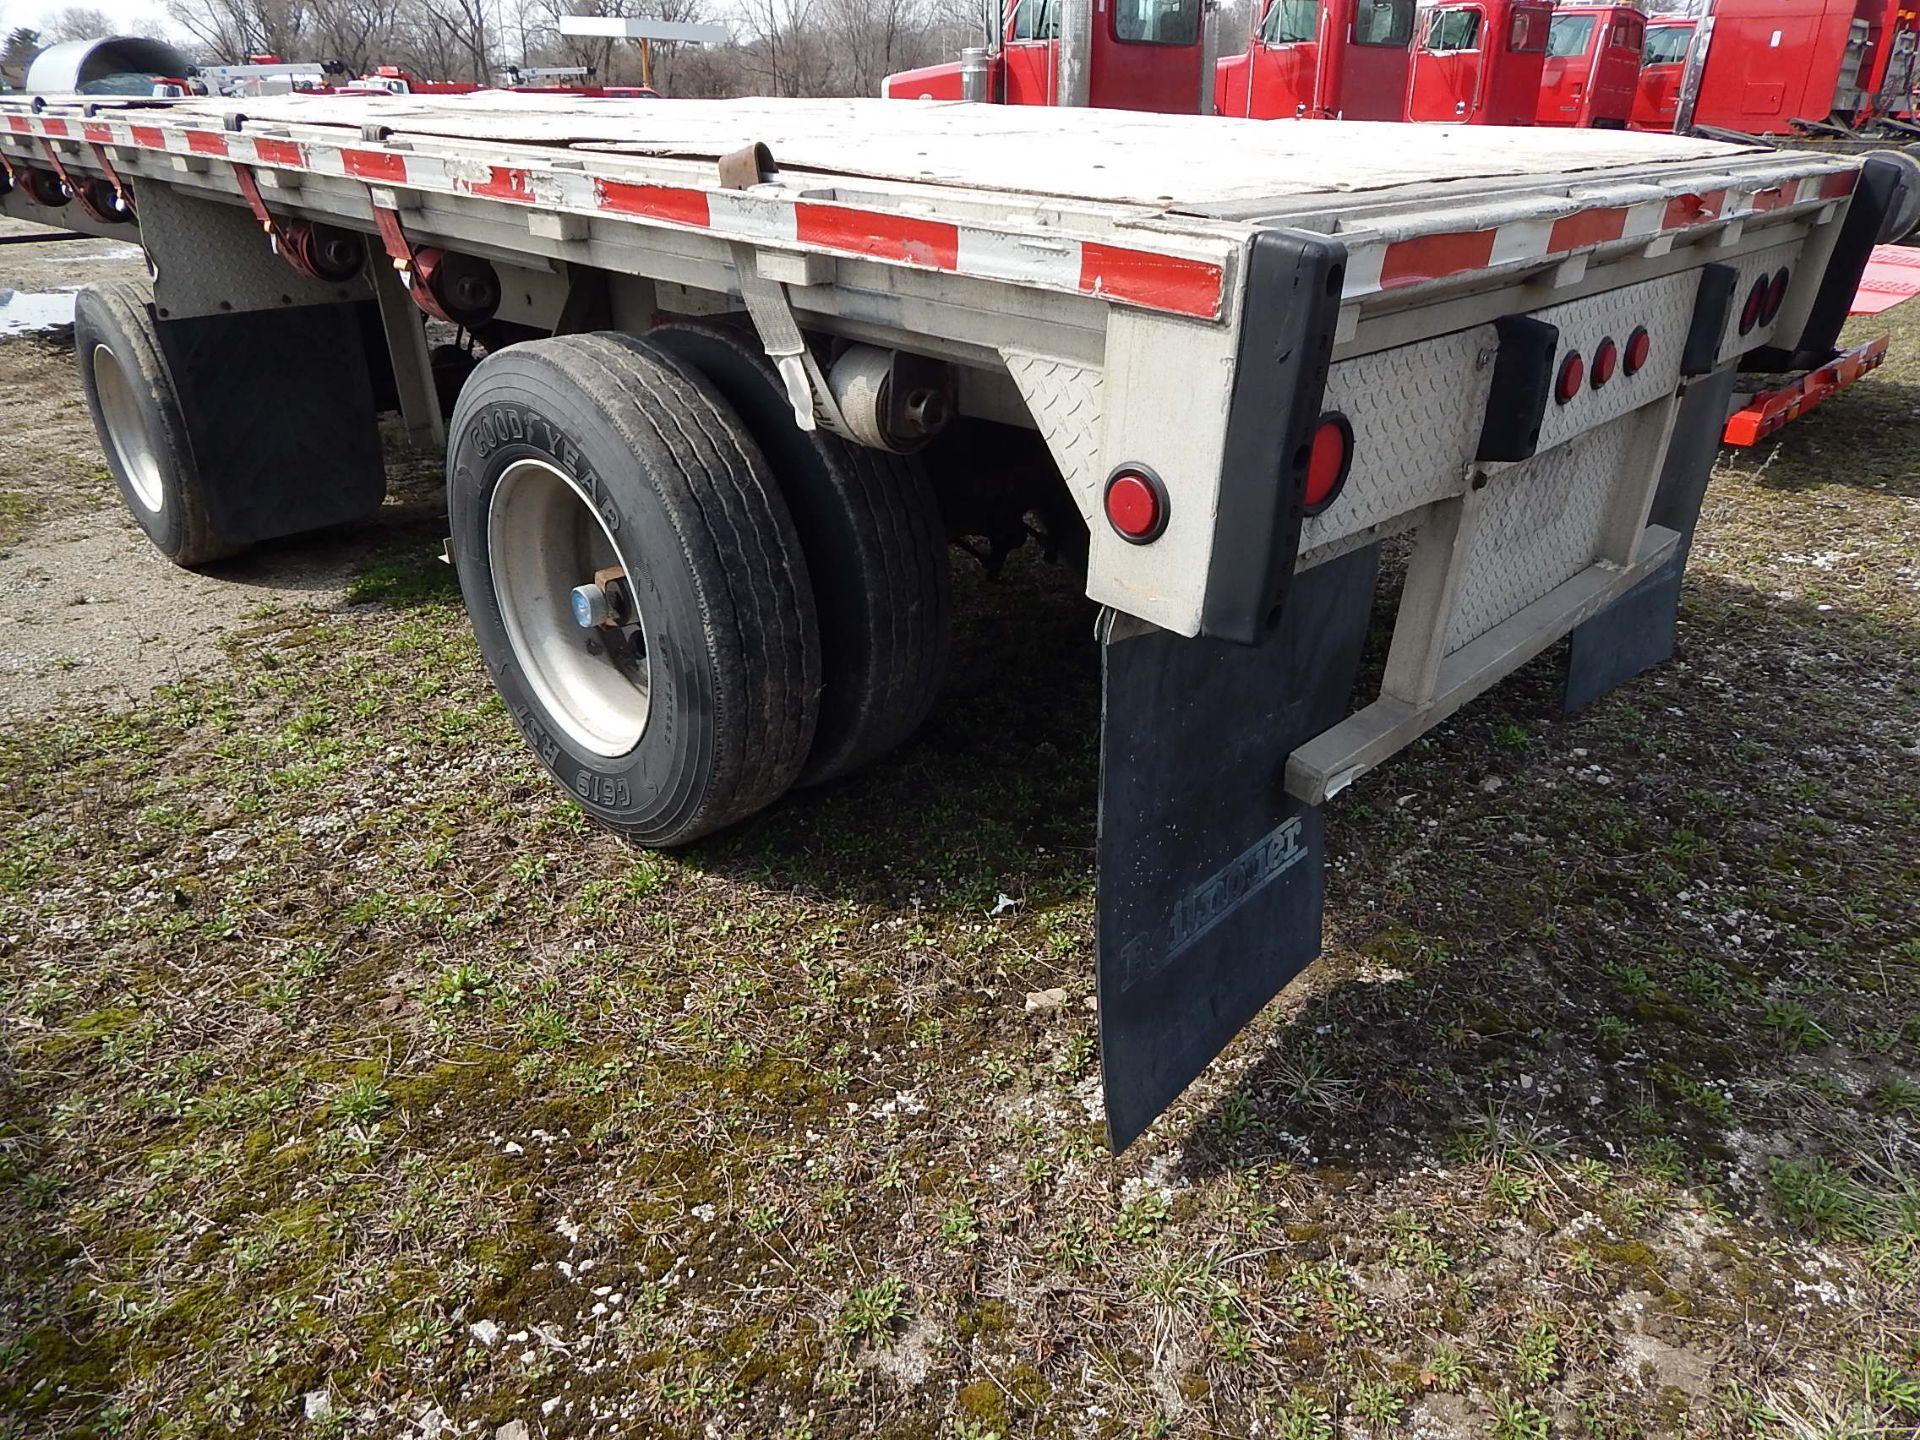 1996 Reitnouer Flat Bed Aluminum Semi Trailer, VIN: 1RNF48A27TR002404, 48 Ft., Tandem Spread Axle, - Image 7 of 13